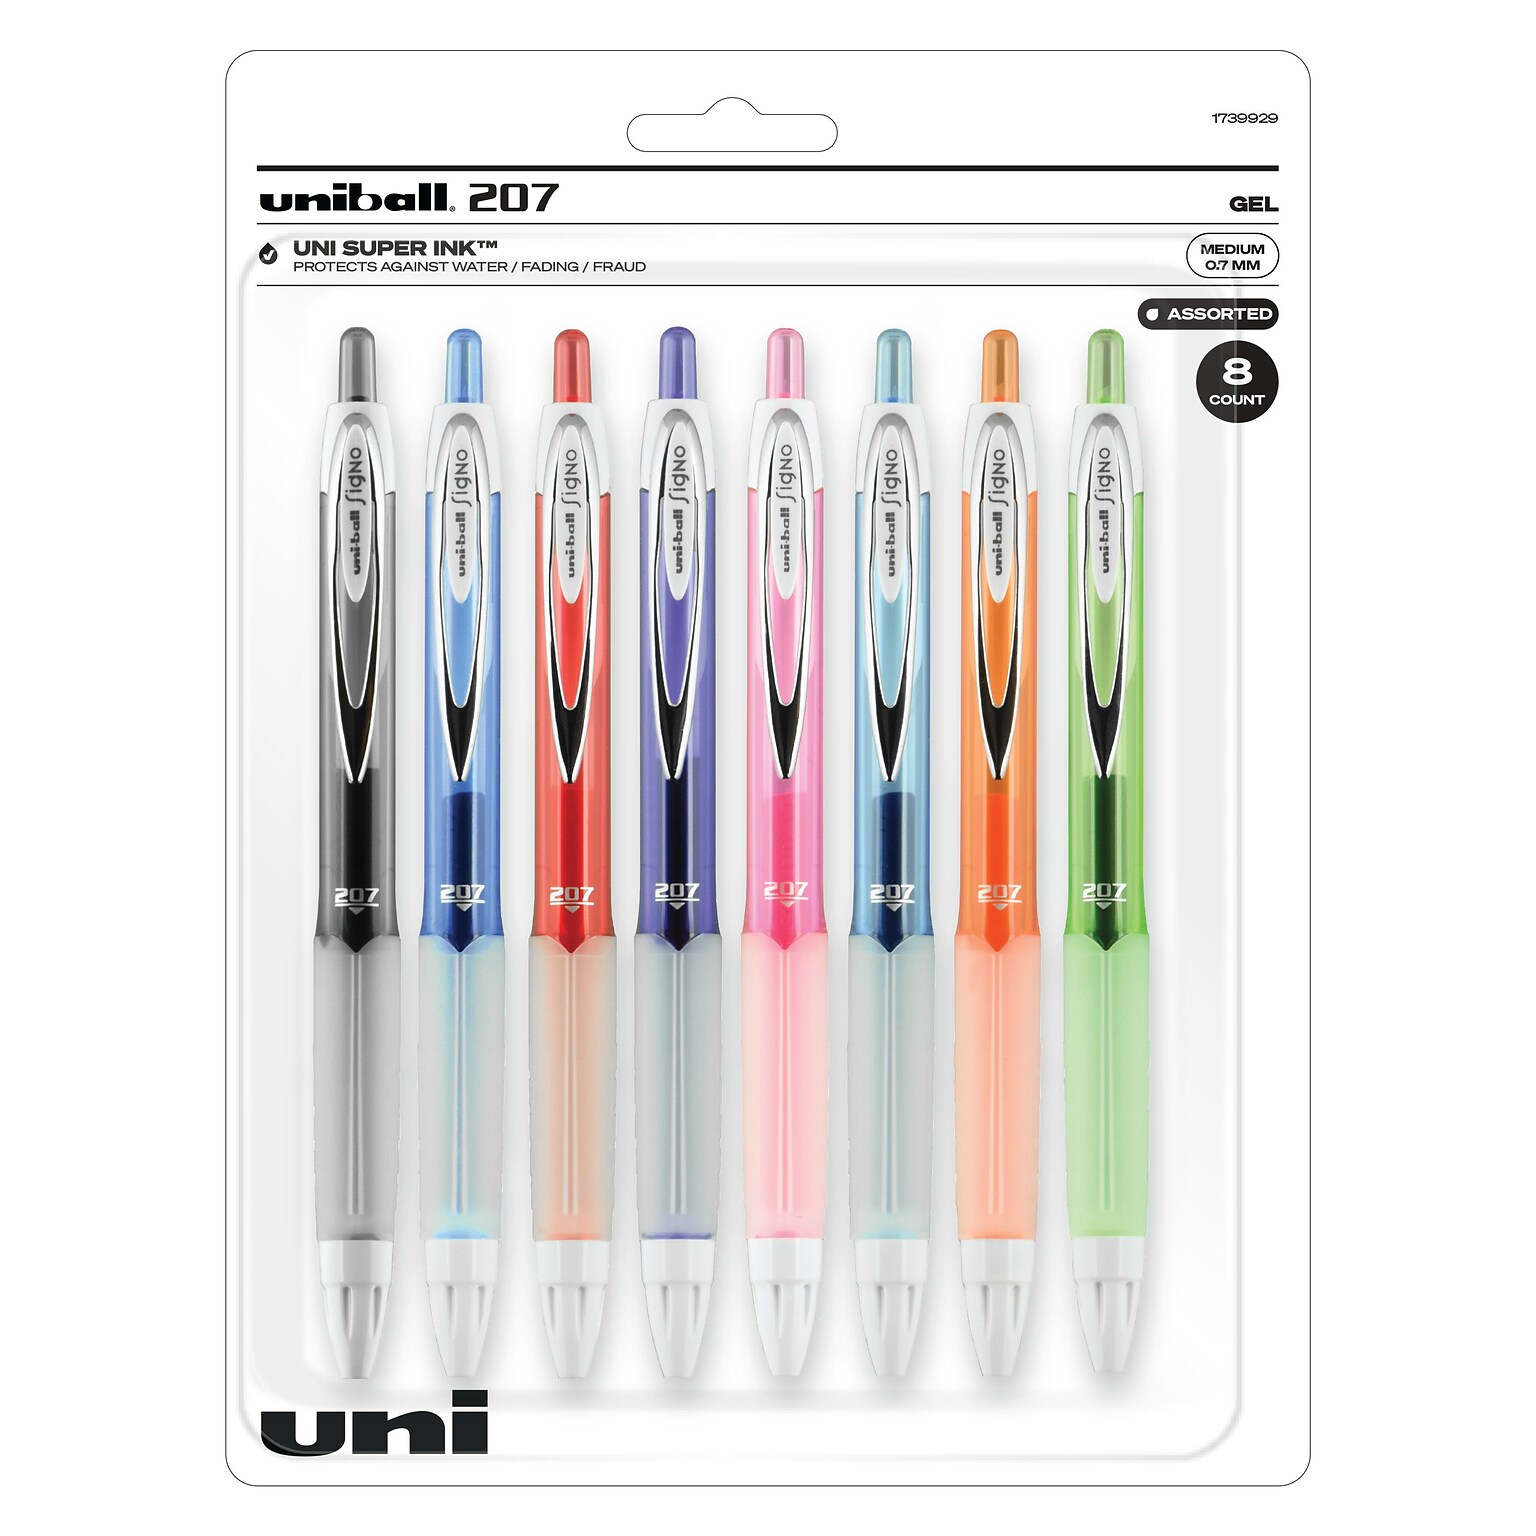 uniball 207 Fashion Retractable Gel Pens, Medium Point, 0.7mm, Assorted Ink, 8/Pack (1739929)